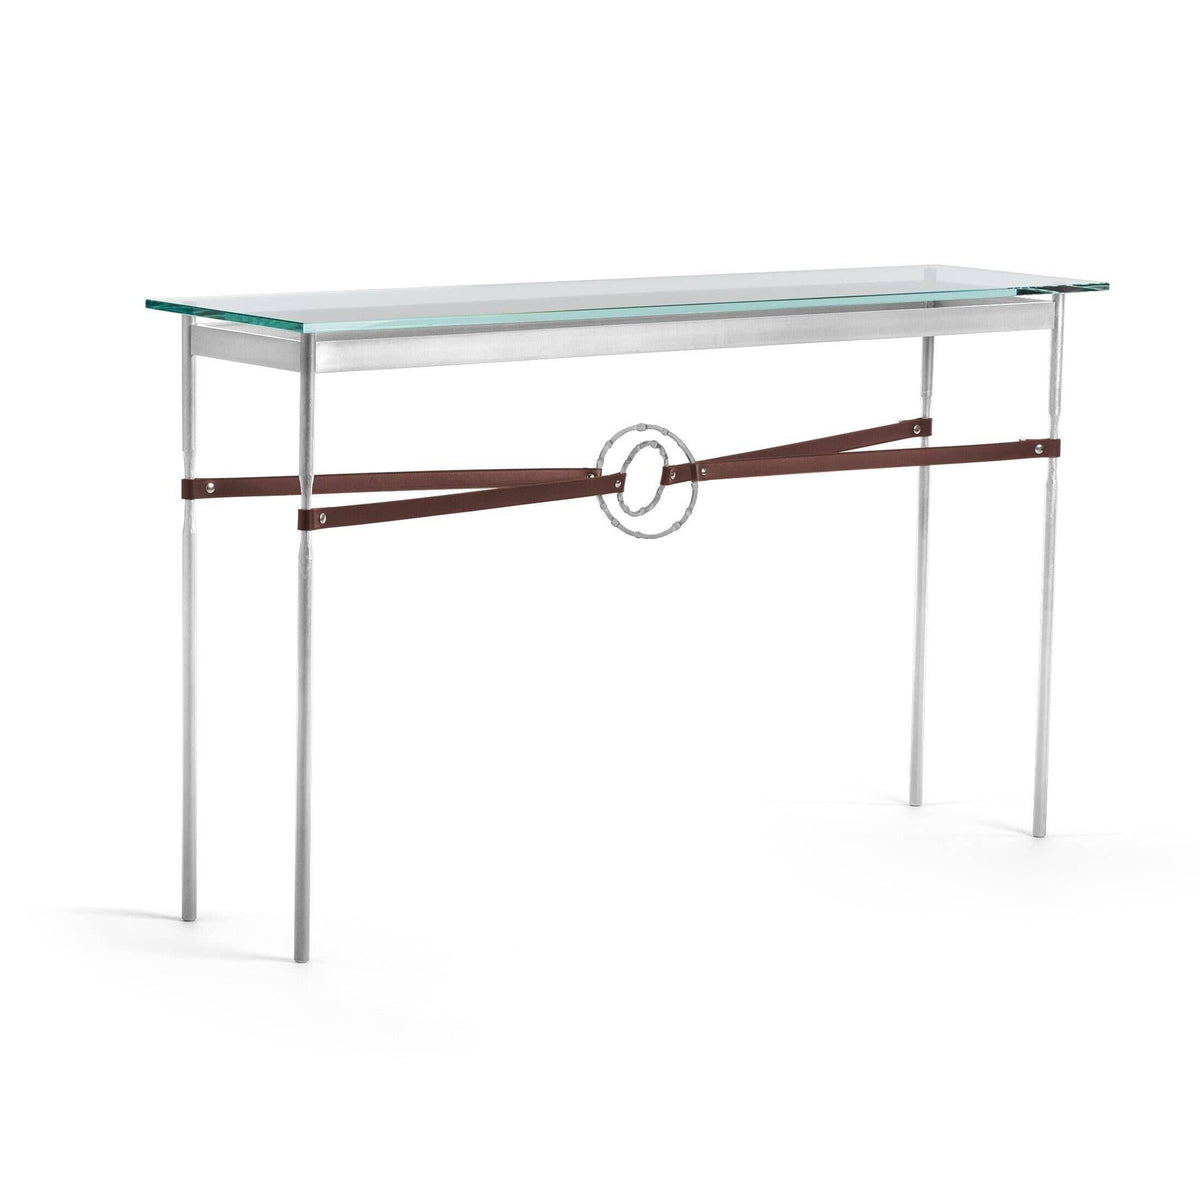 Hubbardton Forge - Equus Brown Leather Console Table - 750118-85-82-LB-VA0714 | Montreal Lighting & Hardware